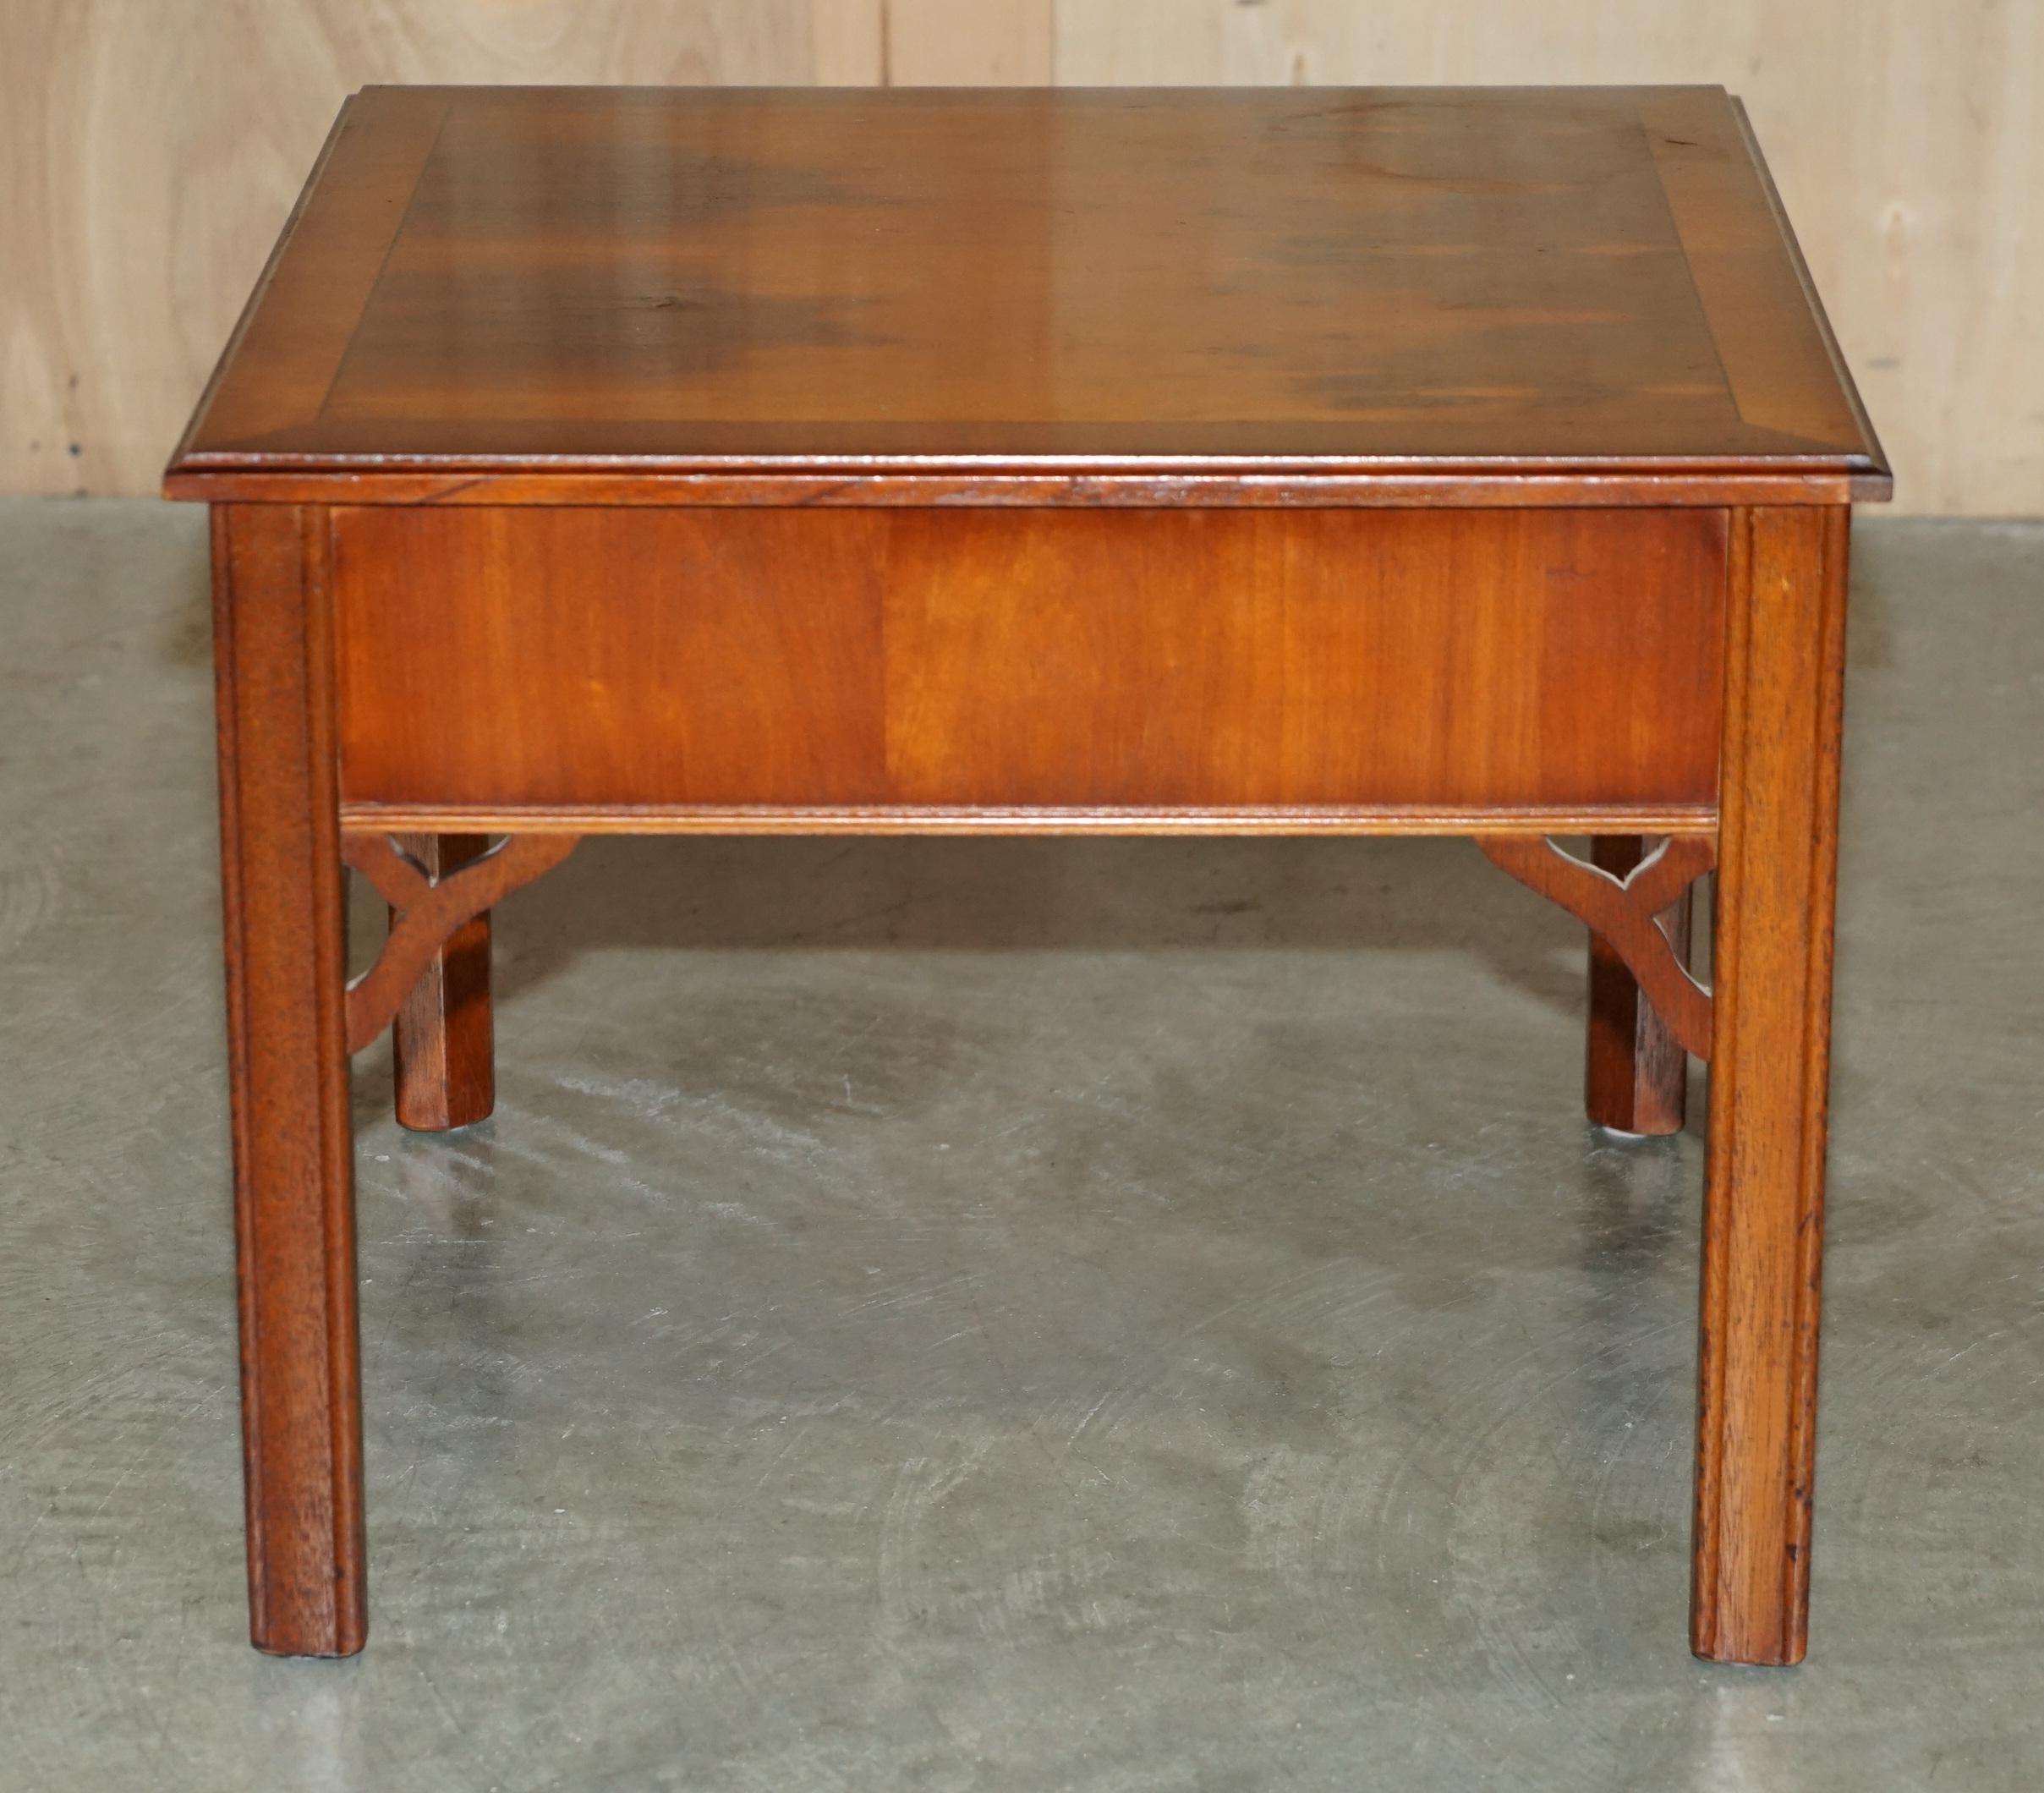 LOVELY PAIR OF BURR YEW WOOD SiDE END LAMP WINE TABLES WITH LARGE SINGLE DRAWERS For Sale 3